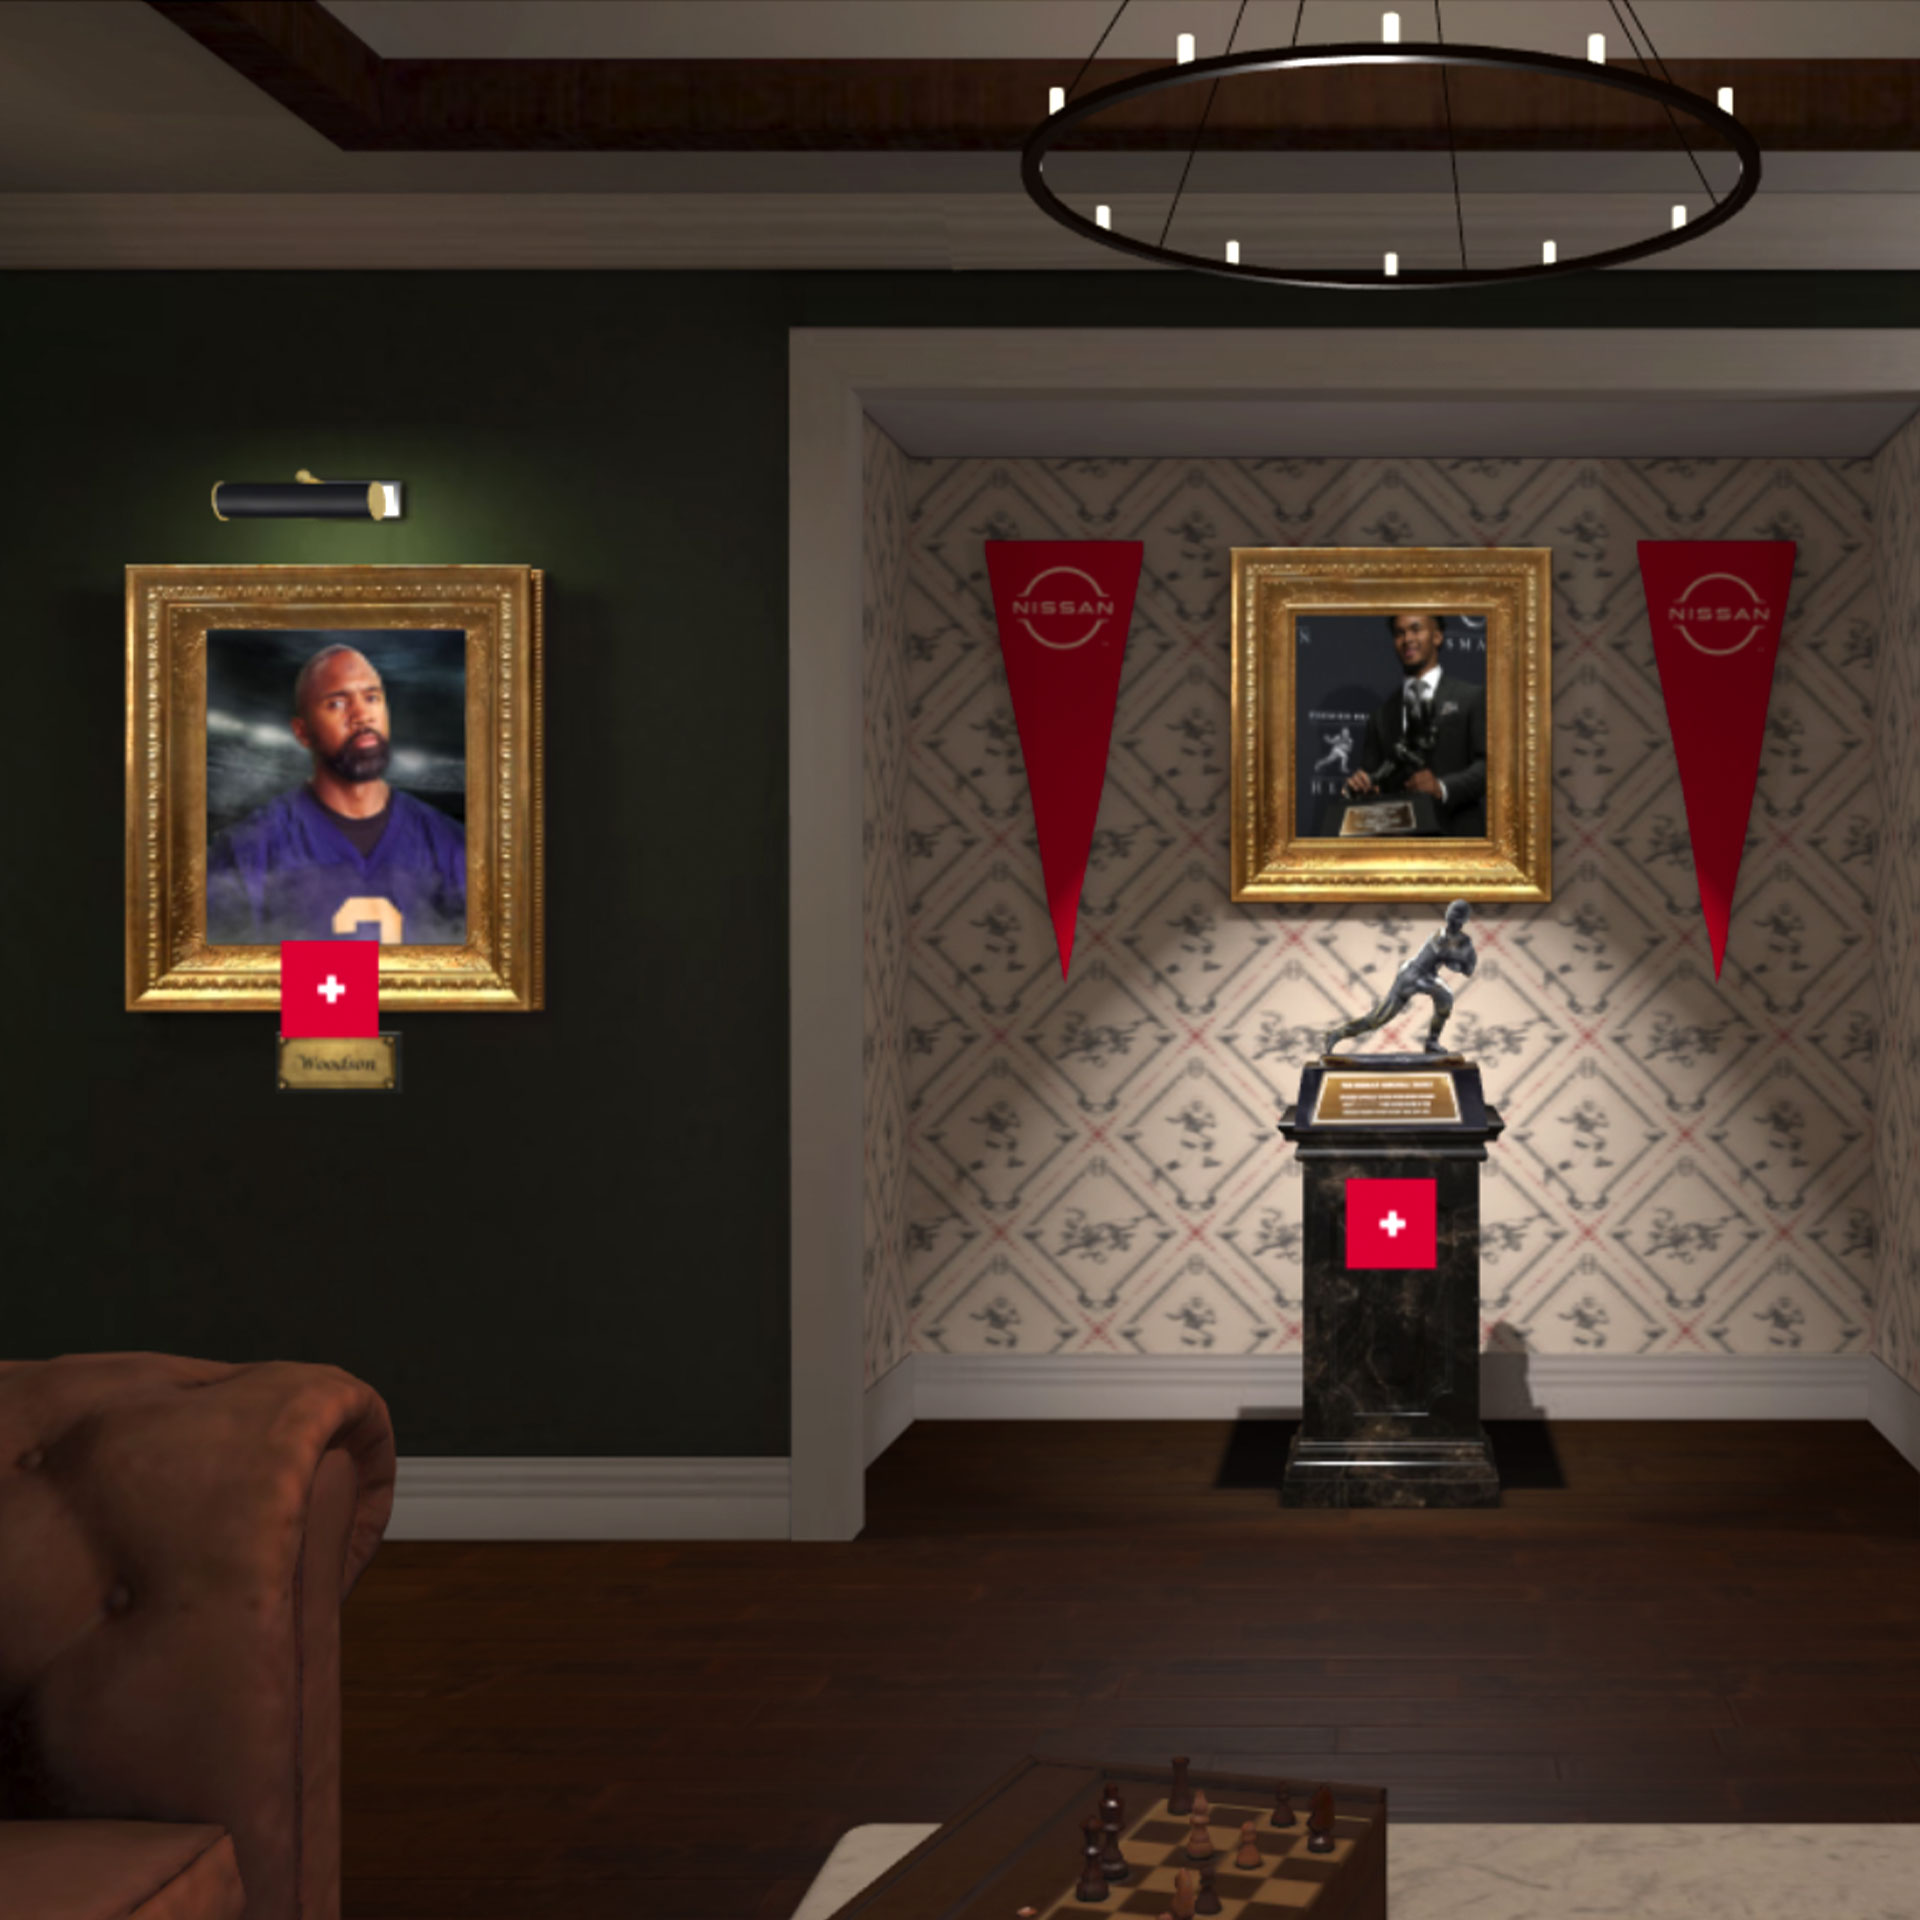 Walls in the Heisman House are filled with photographs of athletes on walls